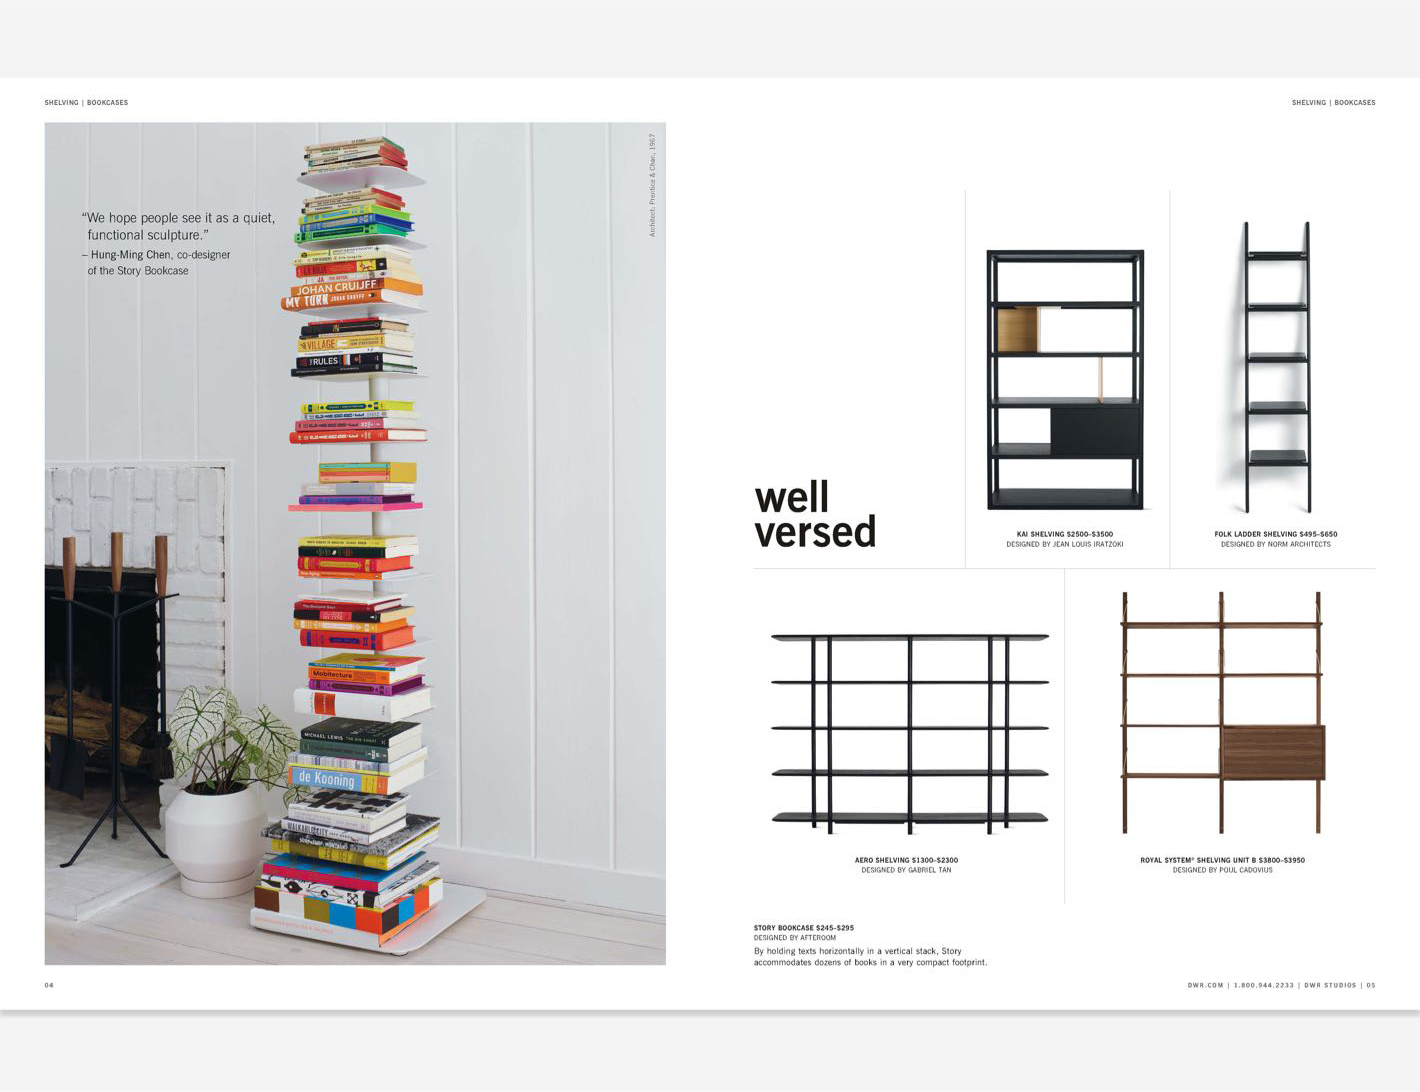 DWRC catalog pages with bookshelves, one shown with books next to a fireplace